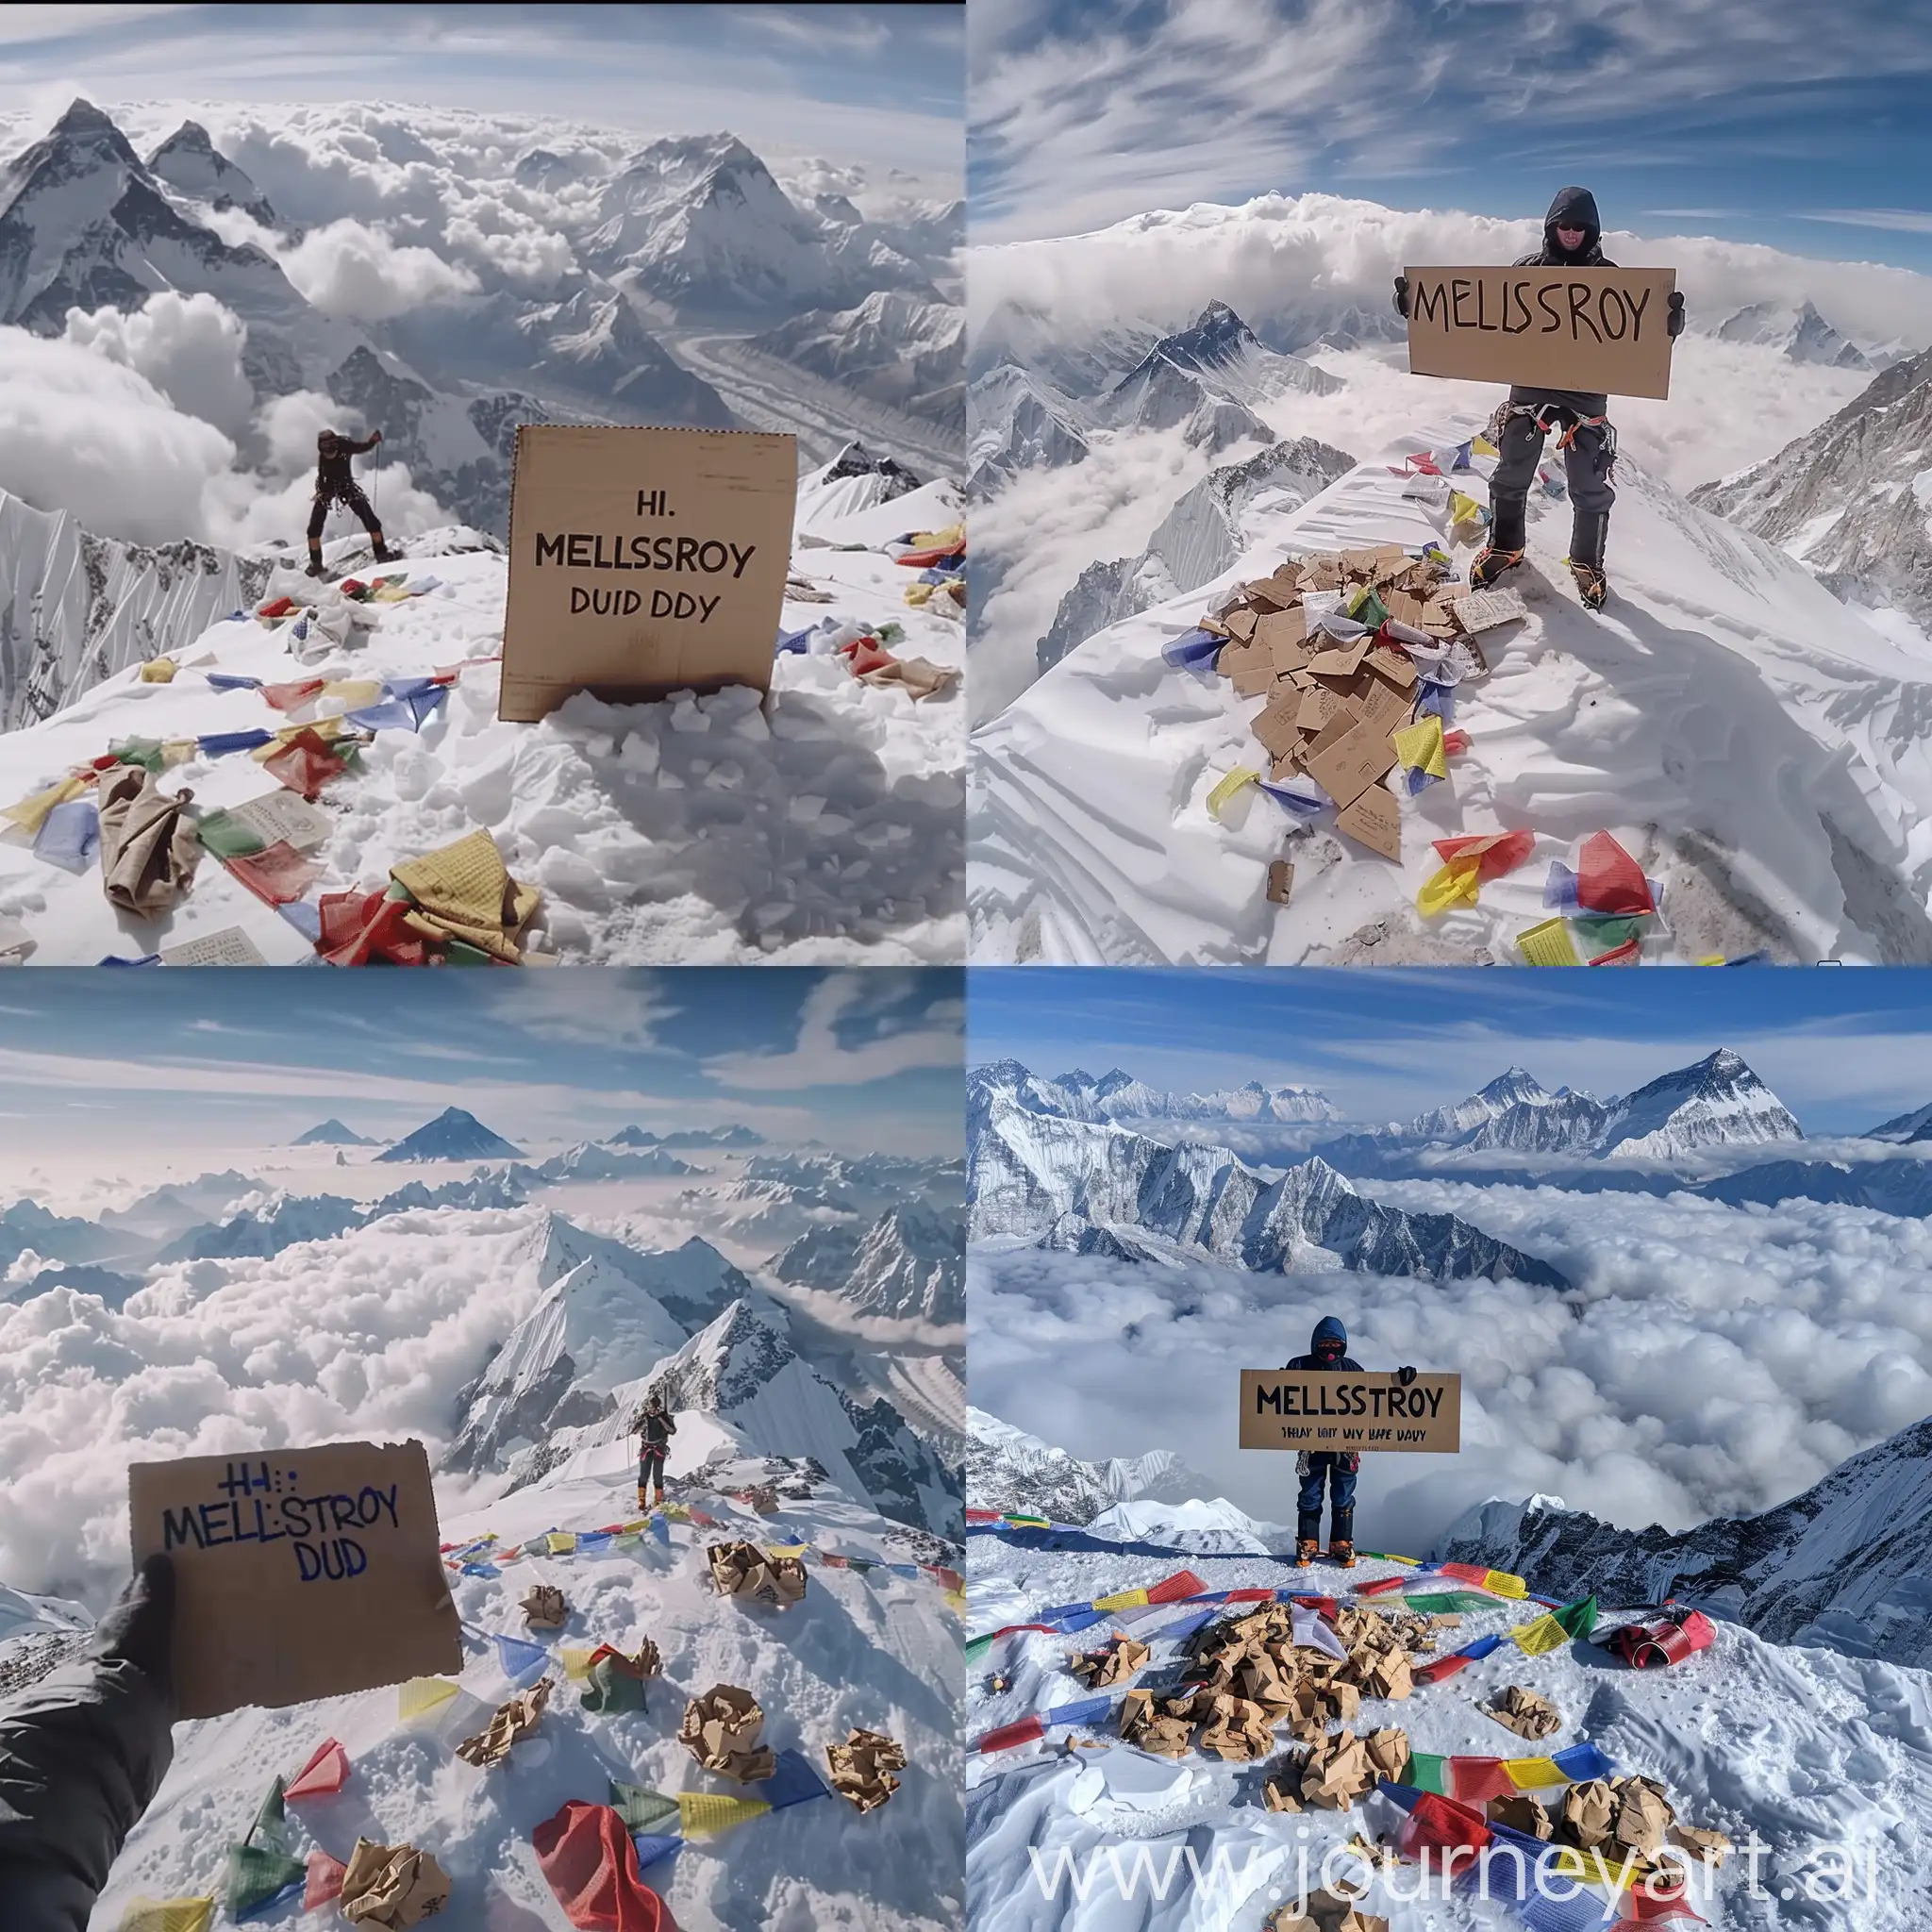 A person standing at the top of Mount Everest, holding a cardboard sign that says MELLSTROY. Crumpled flags from other climbers are scattered in the snow. In the distance, the peaks of other mountains are visible, with clouds partially covering them. In the video, the person says, "Hey, MELLSTROY dude, we did it!" The format should be a realistic video.